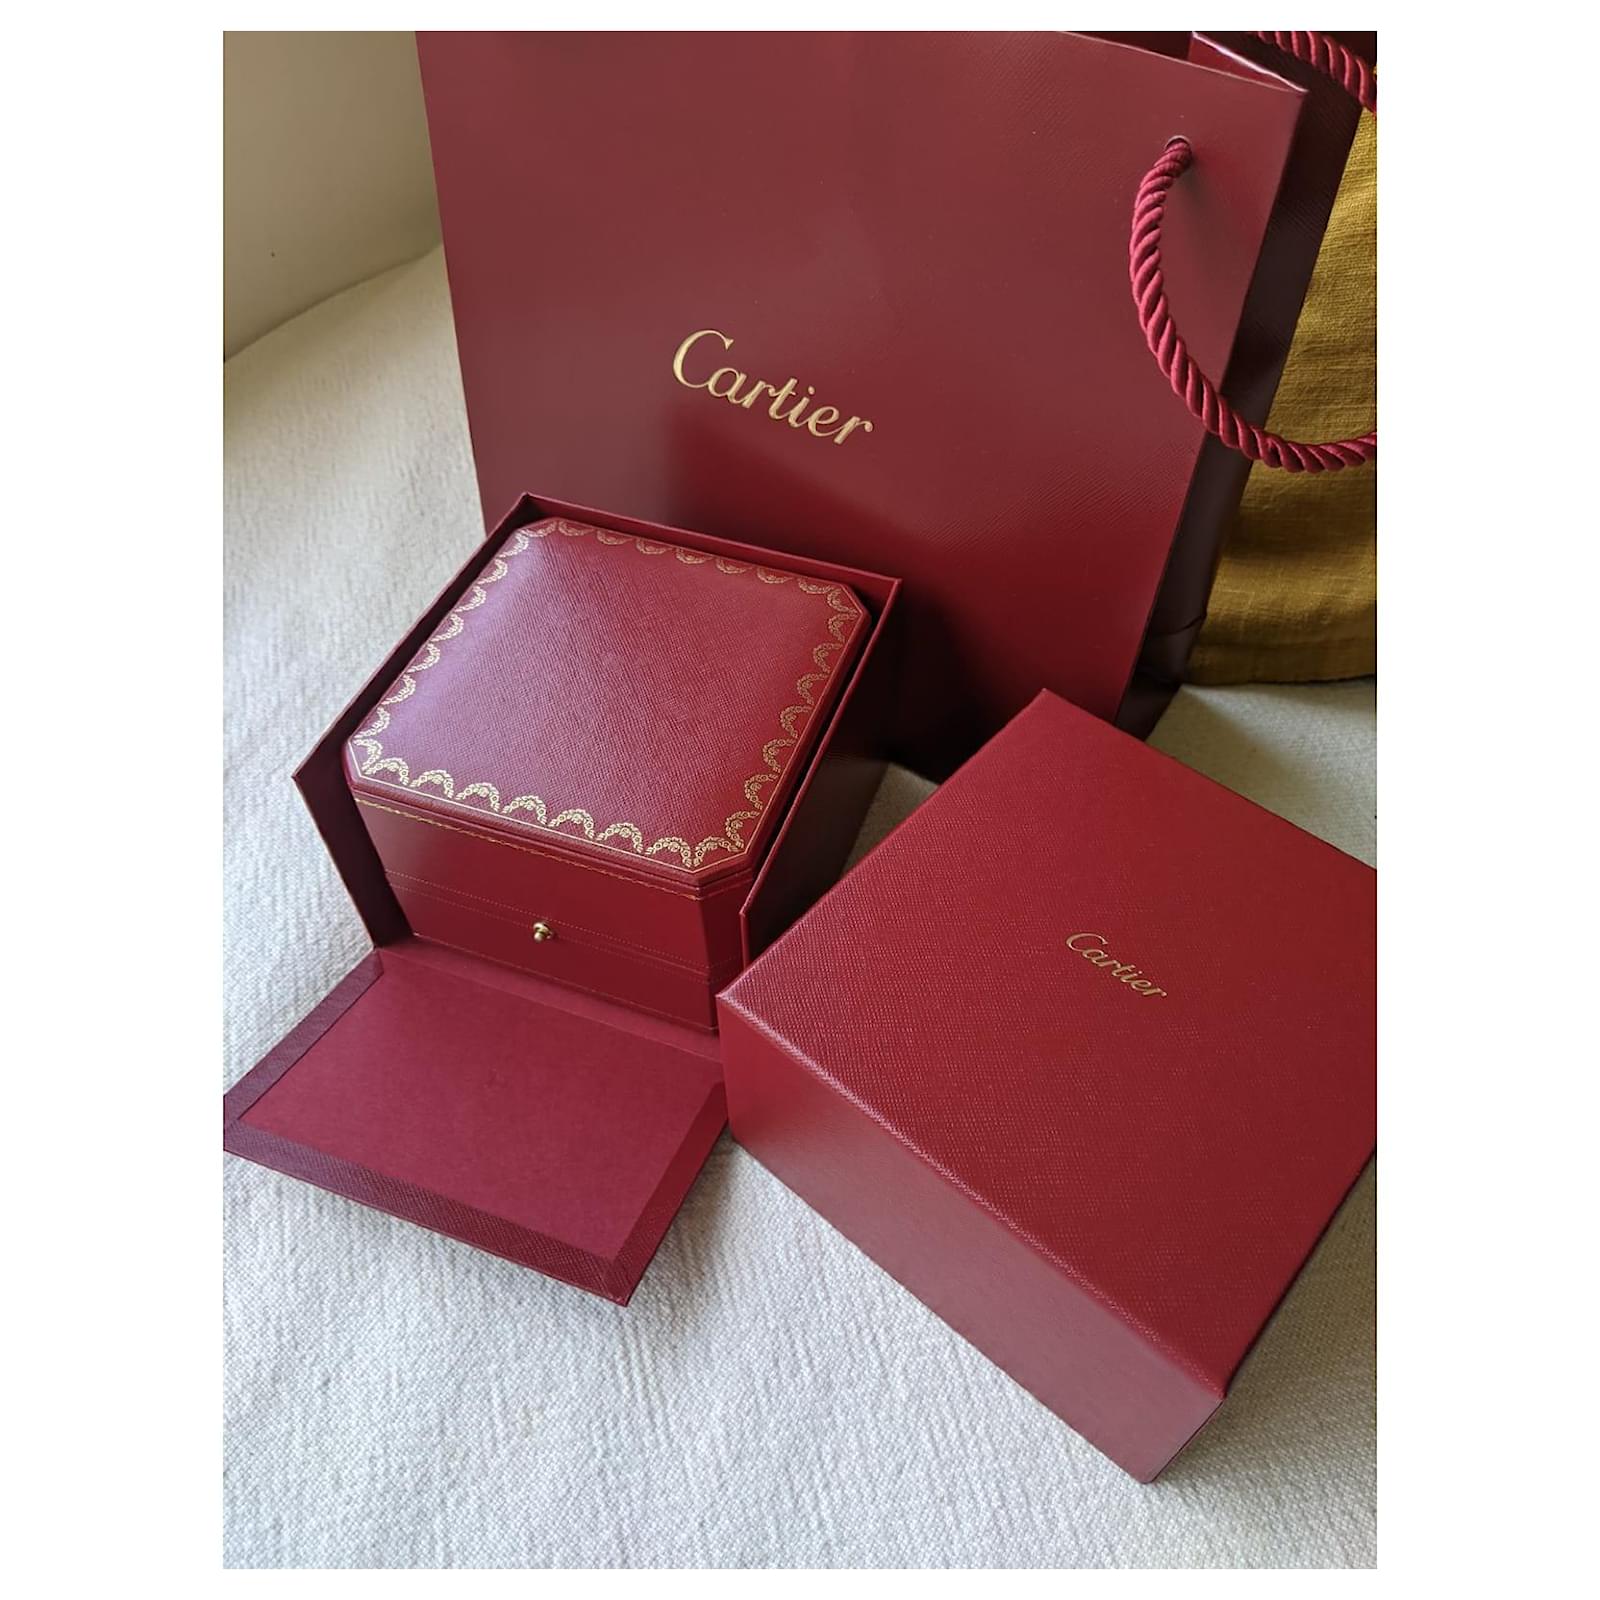 Authentic Cartier Paper Bag. Packaging 